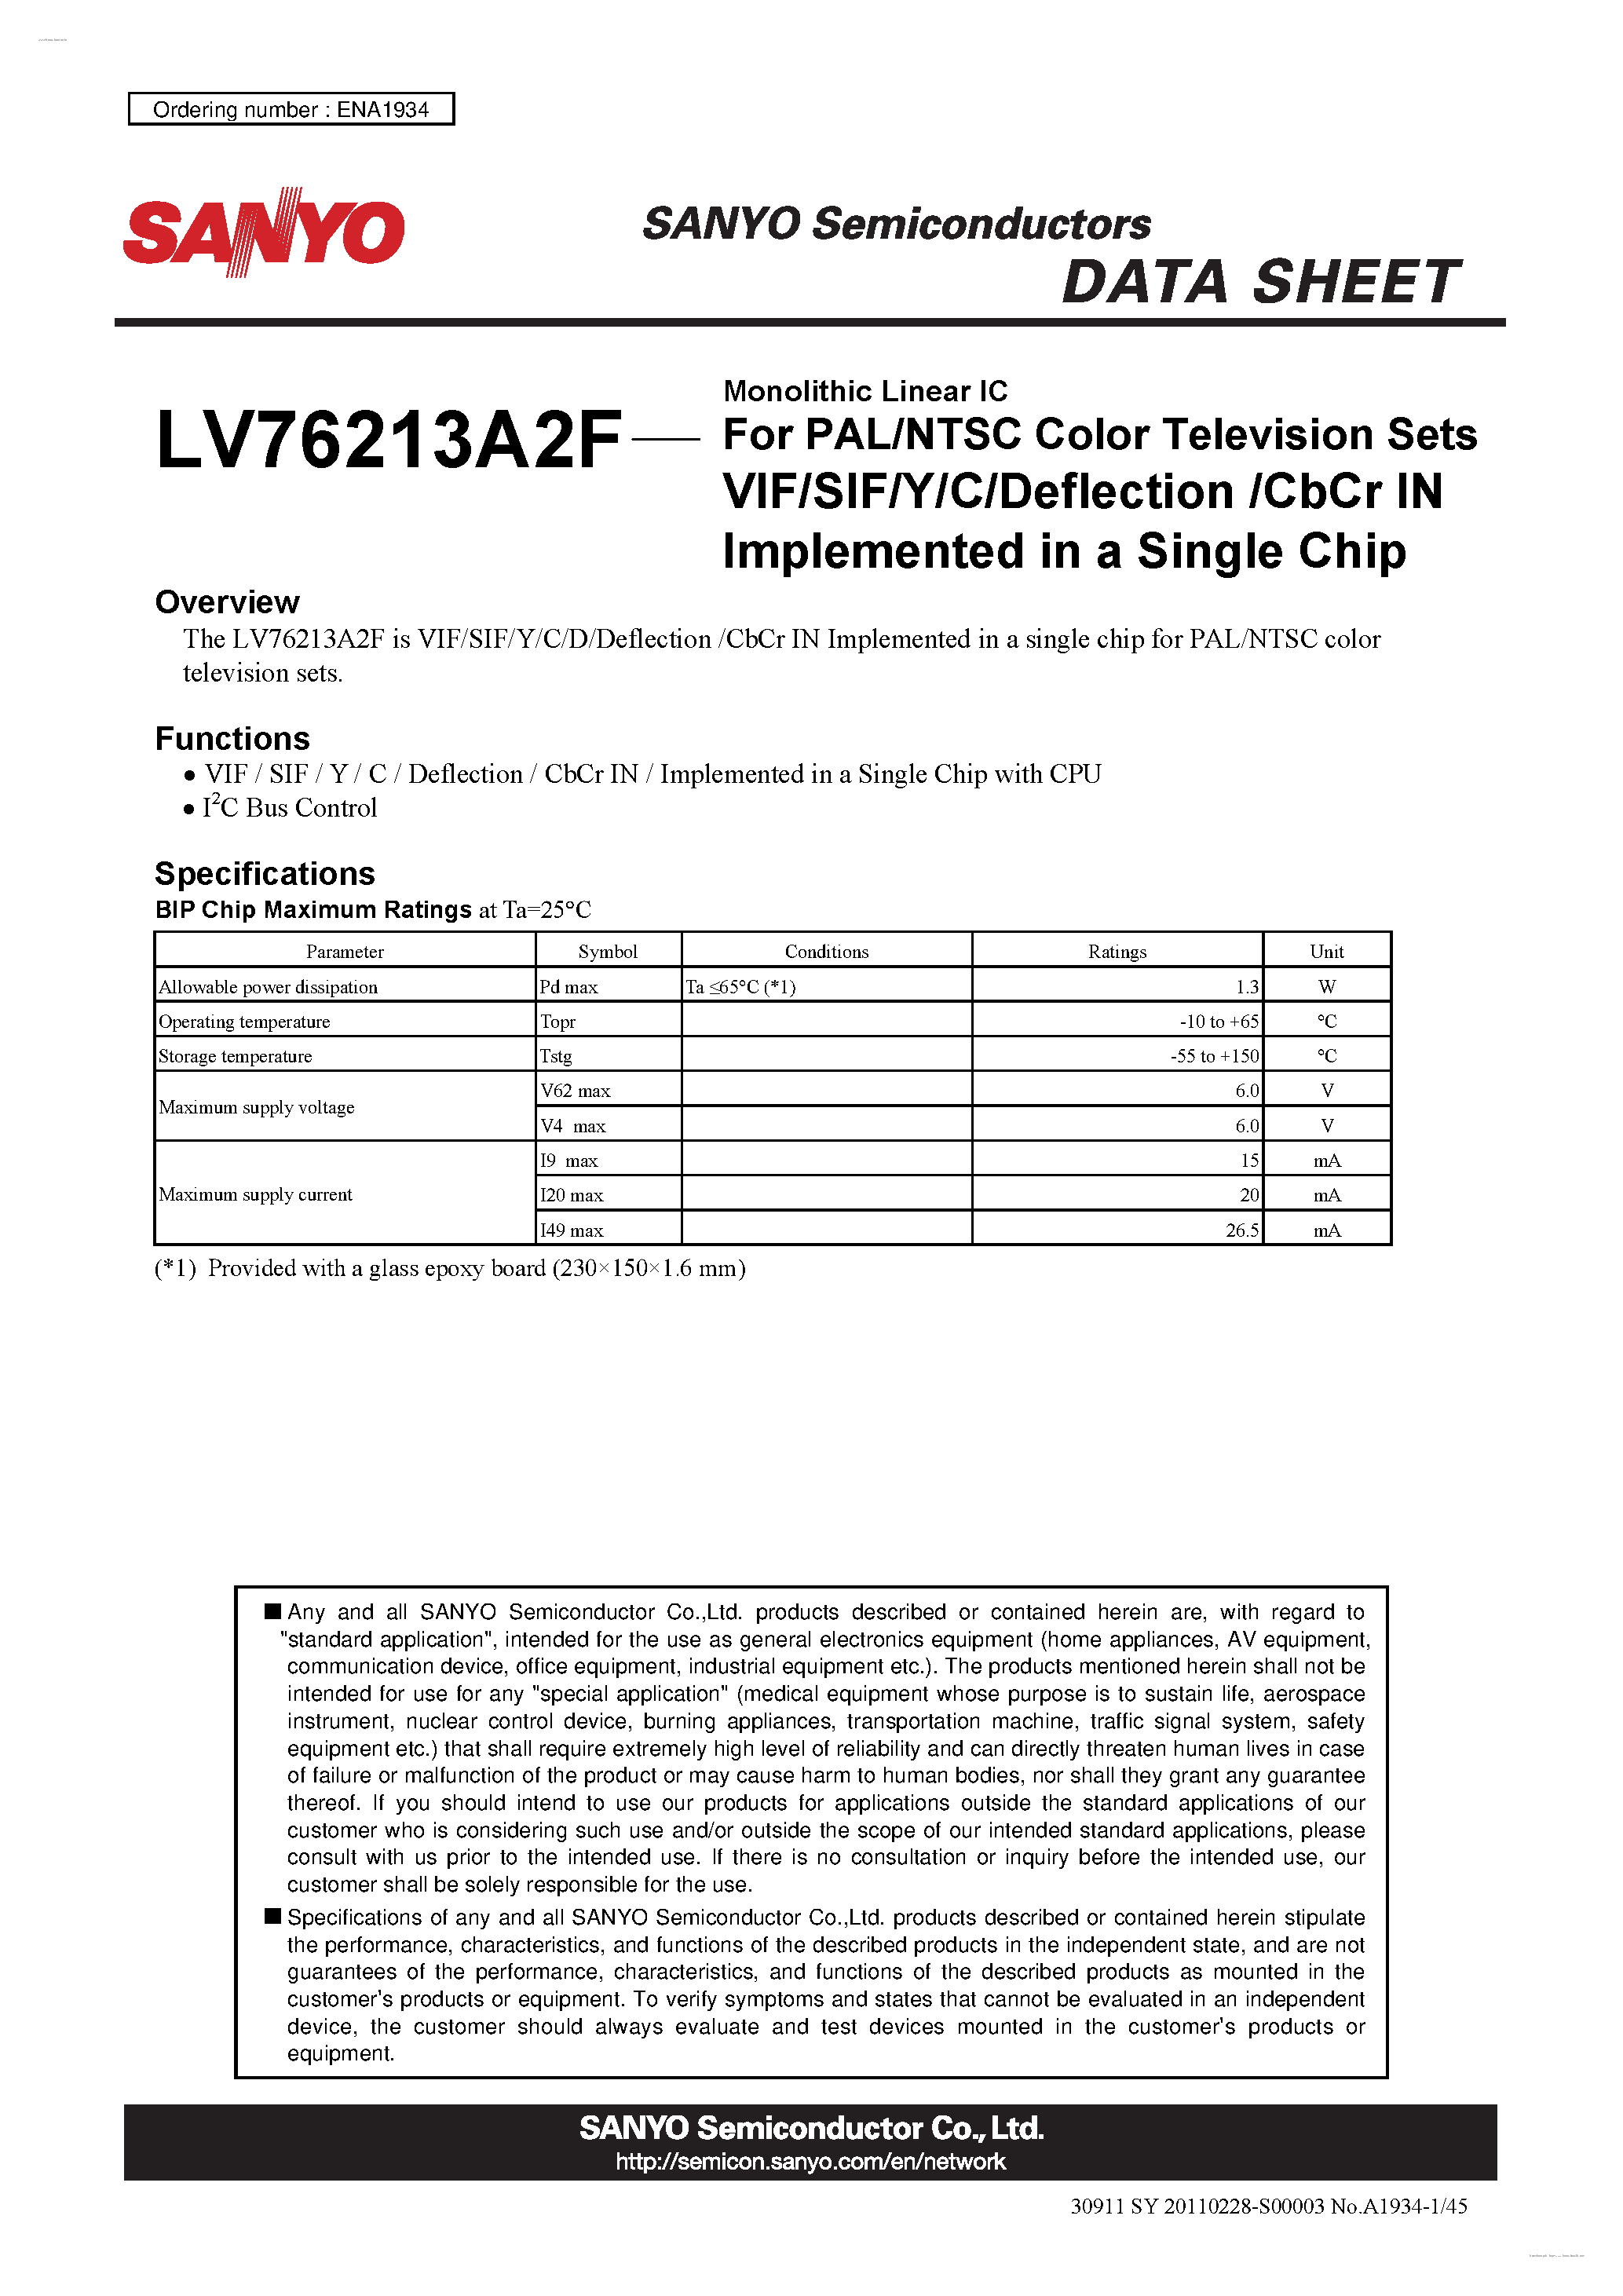 Datasheet LV76213A2F - VIF/SIF/Y/C/Deflection /CbCr IN Implemented in a Single Chip page 1